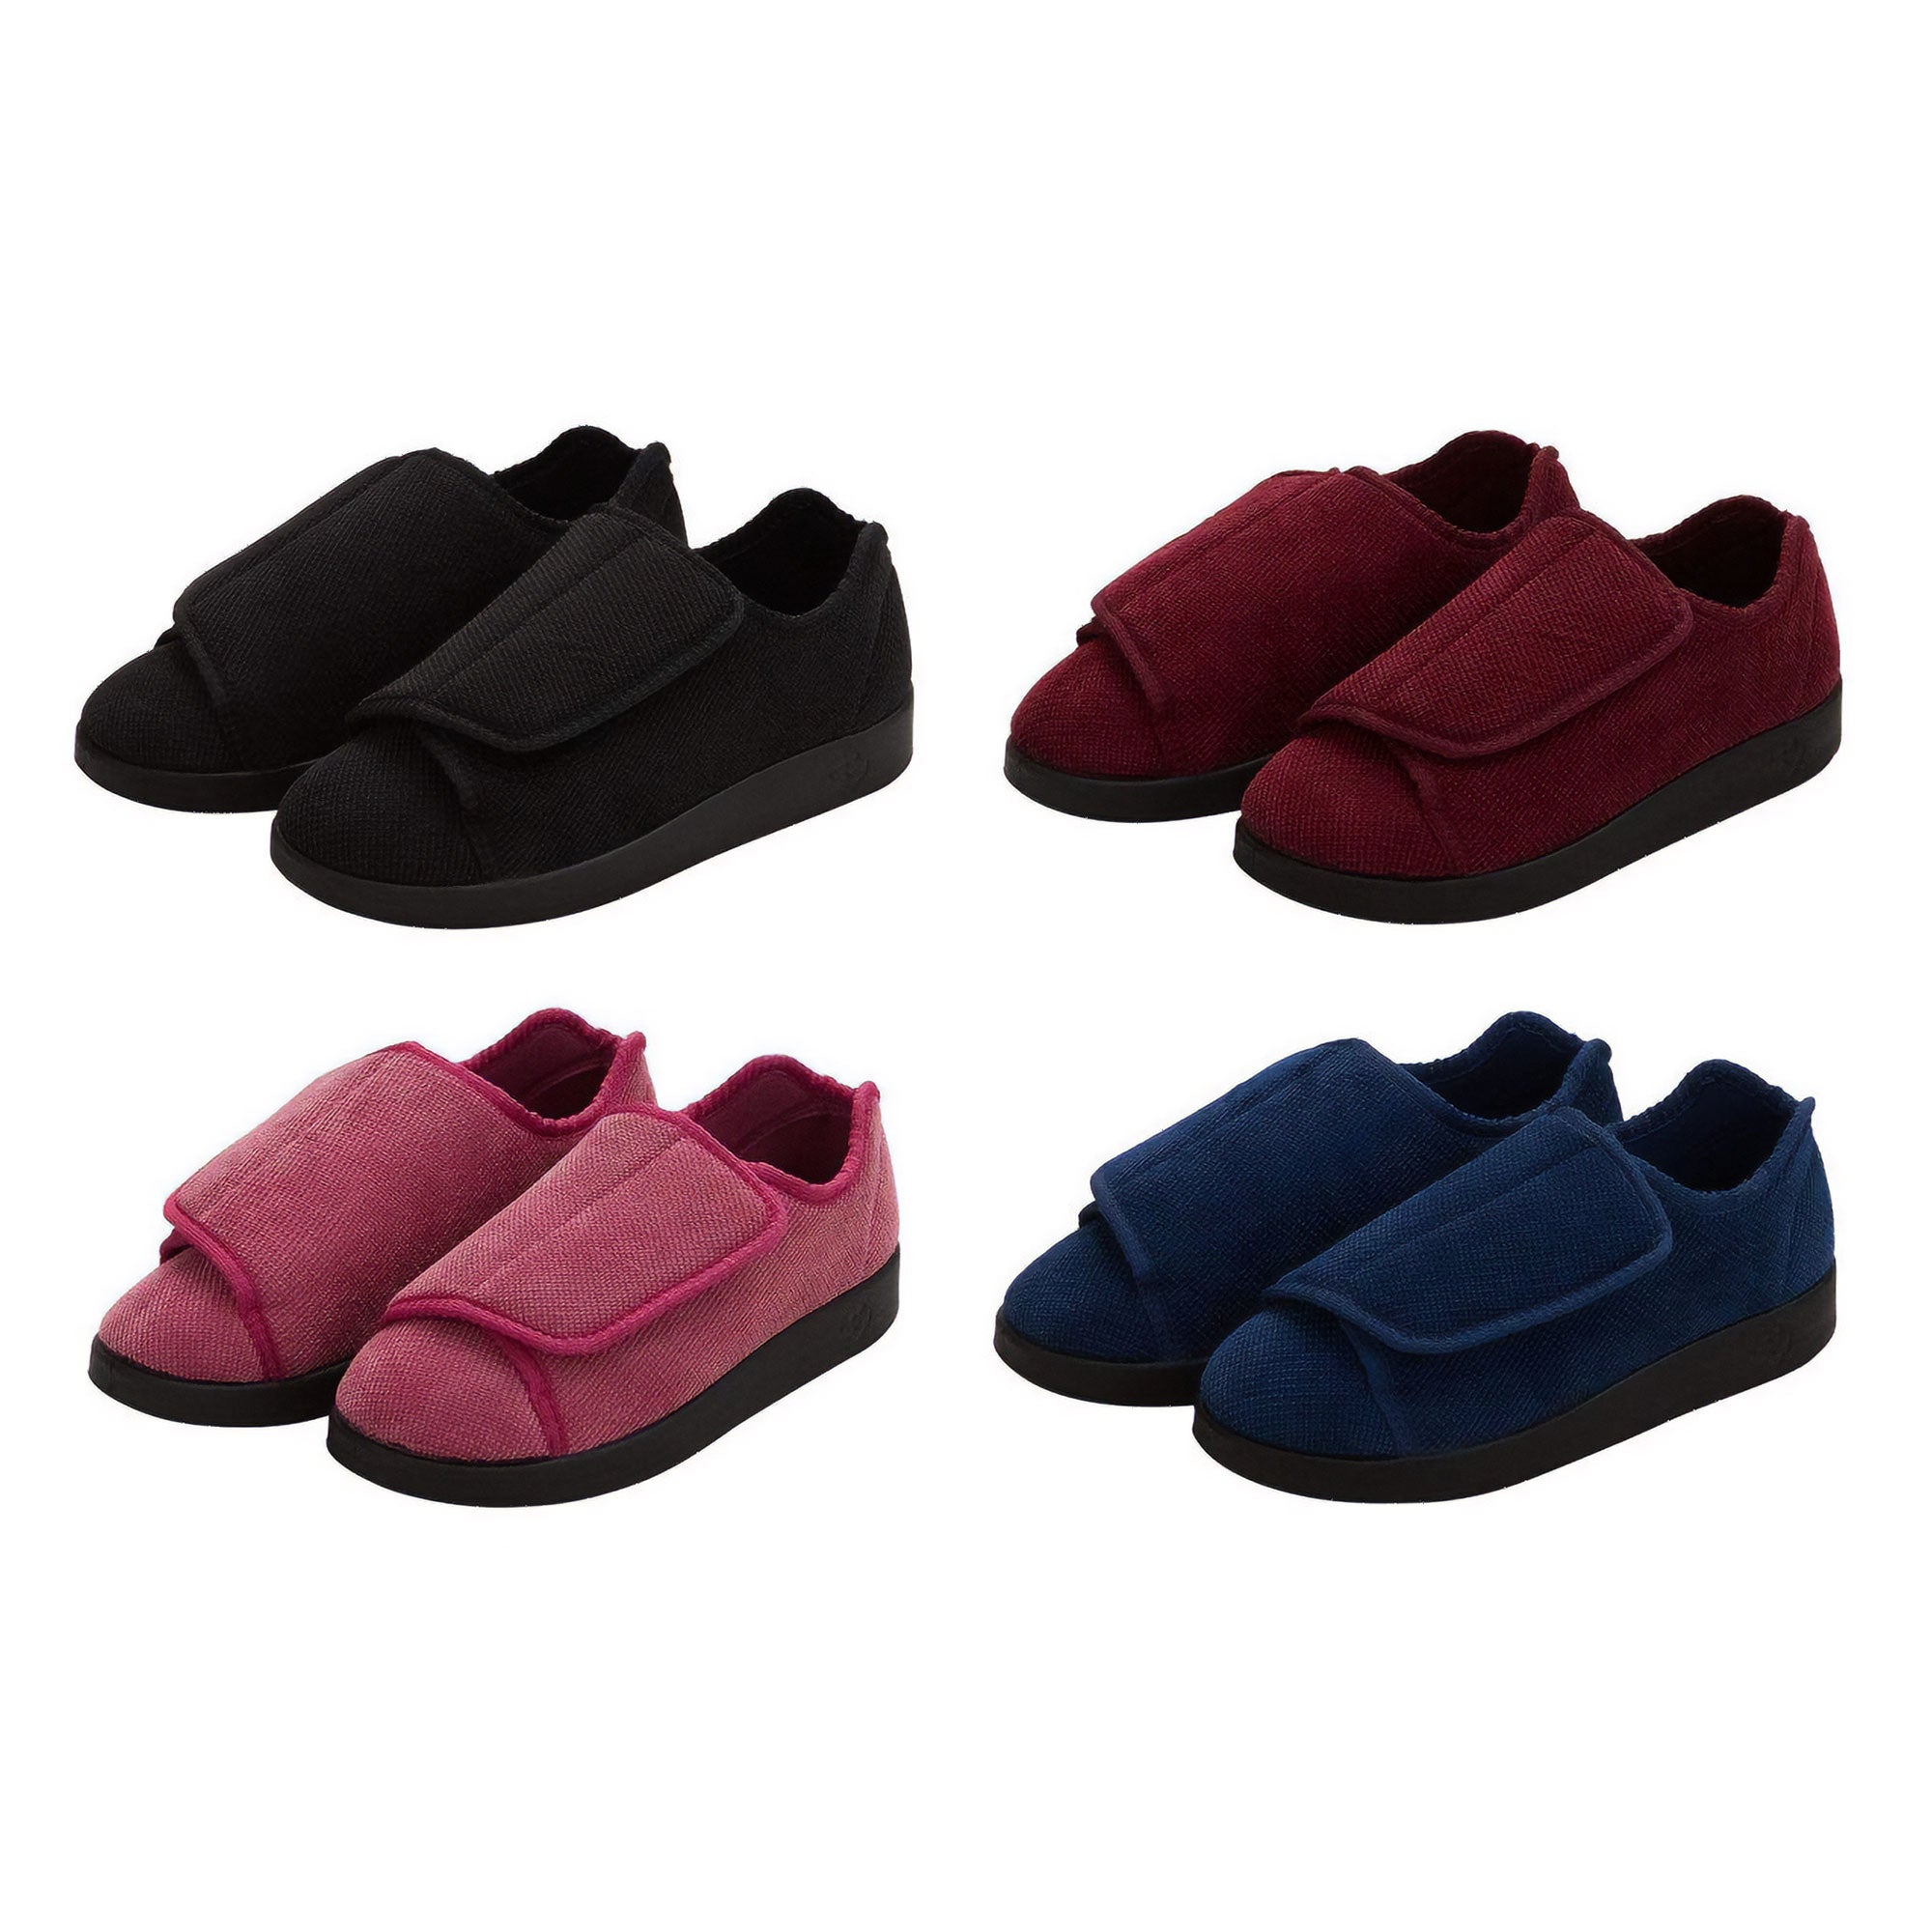 Silverts Women's Antimicrobial Extra Extra Wide Easy-Closure Slippers - Wine - 8